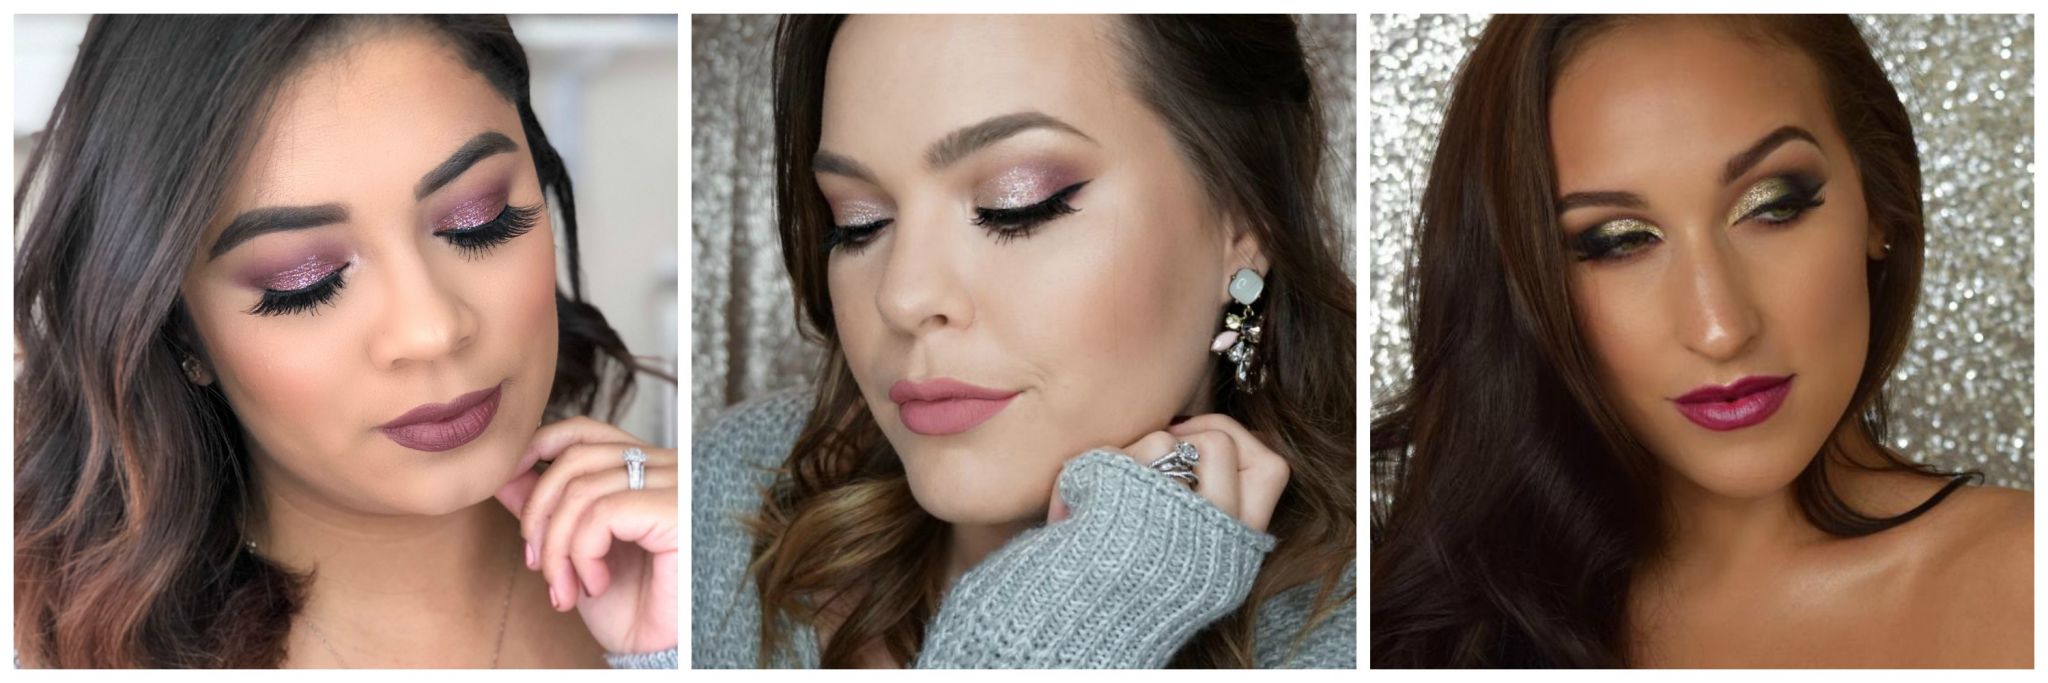 NYE Makeup Looks / Beauty With Lily